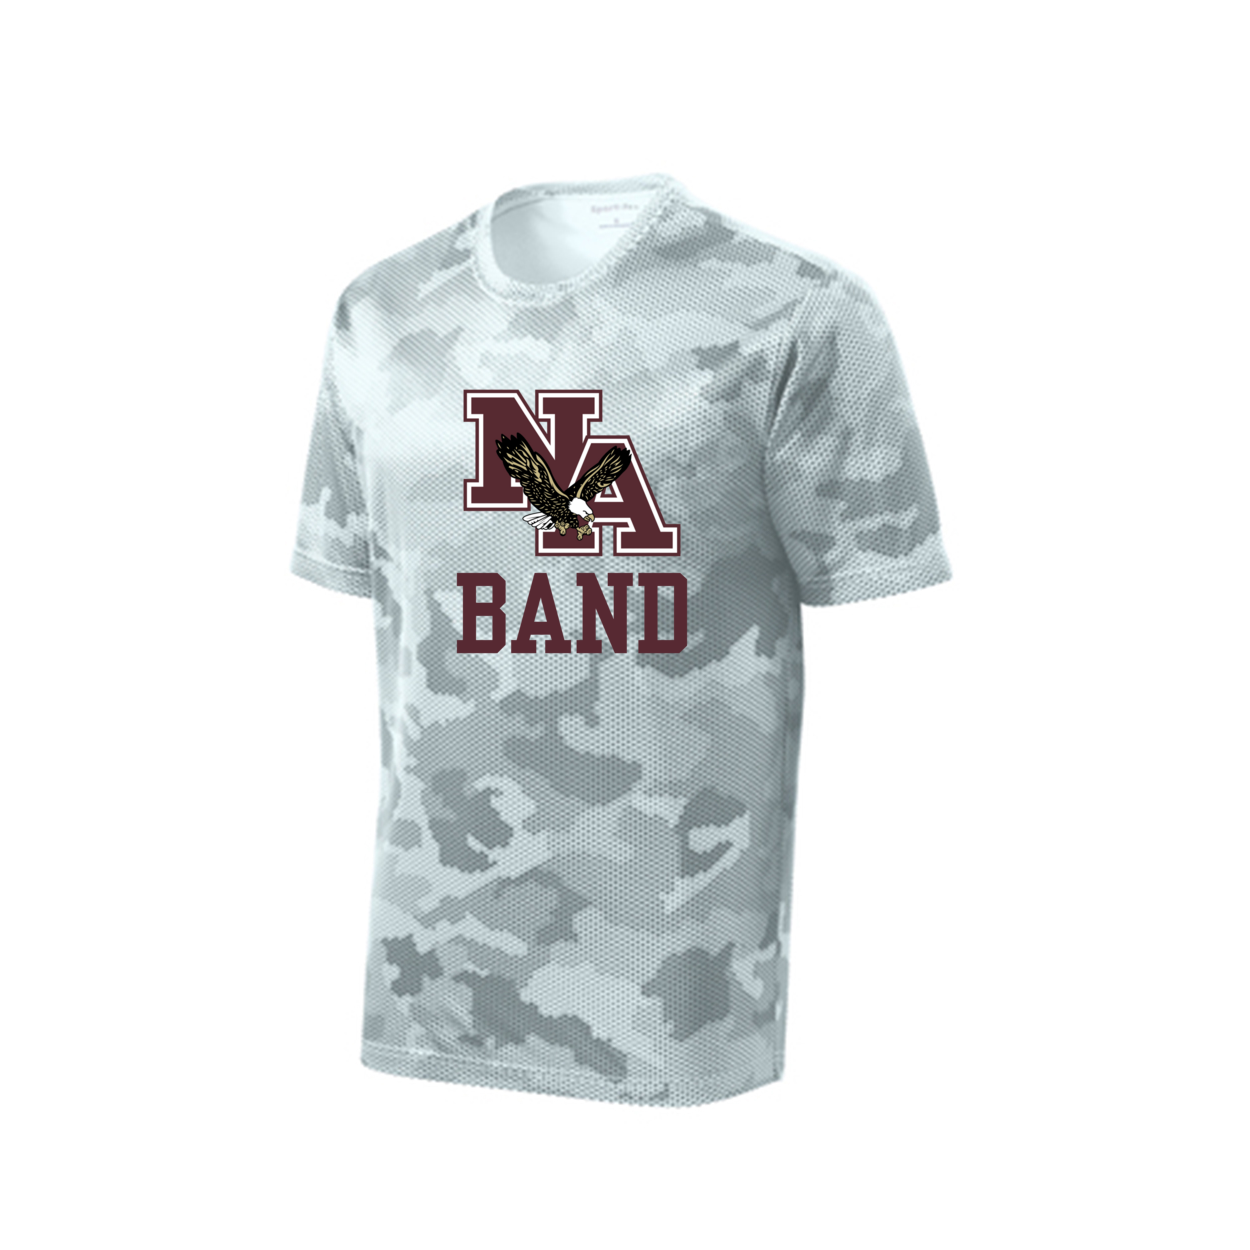 Men's Camo Band Competitor Performance Short Sleeve Graphic Tee - New Albany Eagles